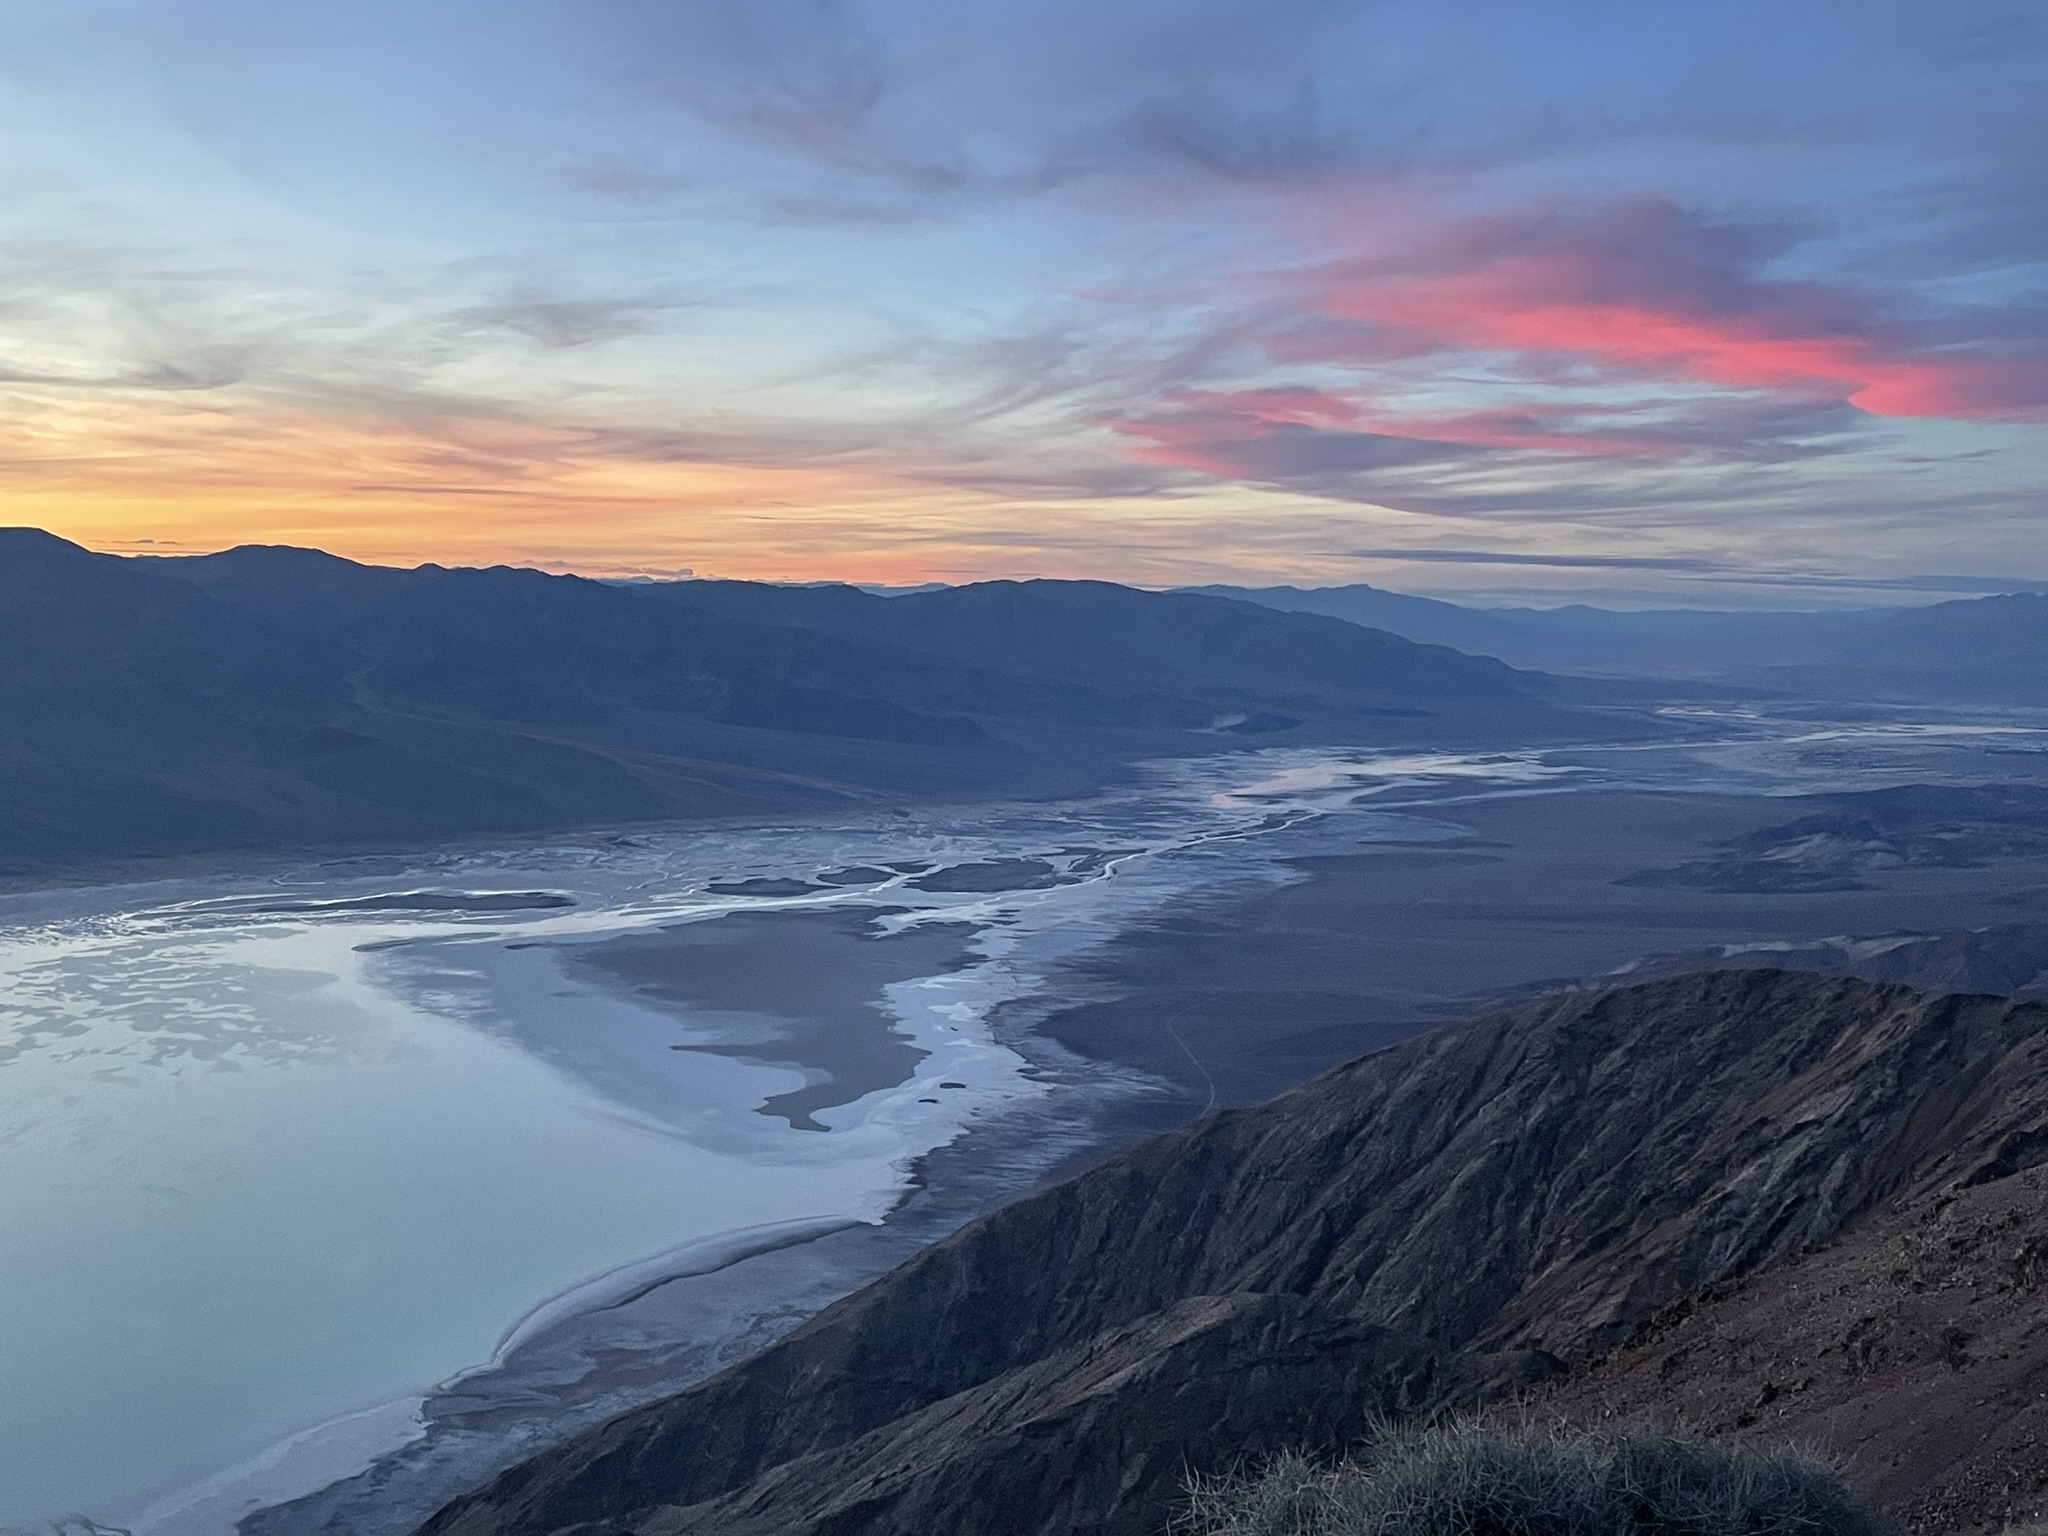 3 Night Camping Itinerary In Death Valley National Park